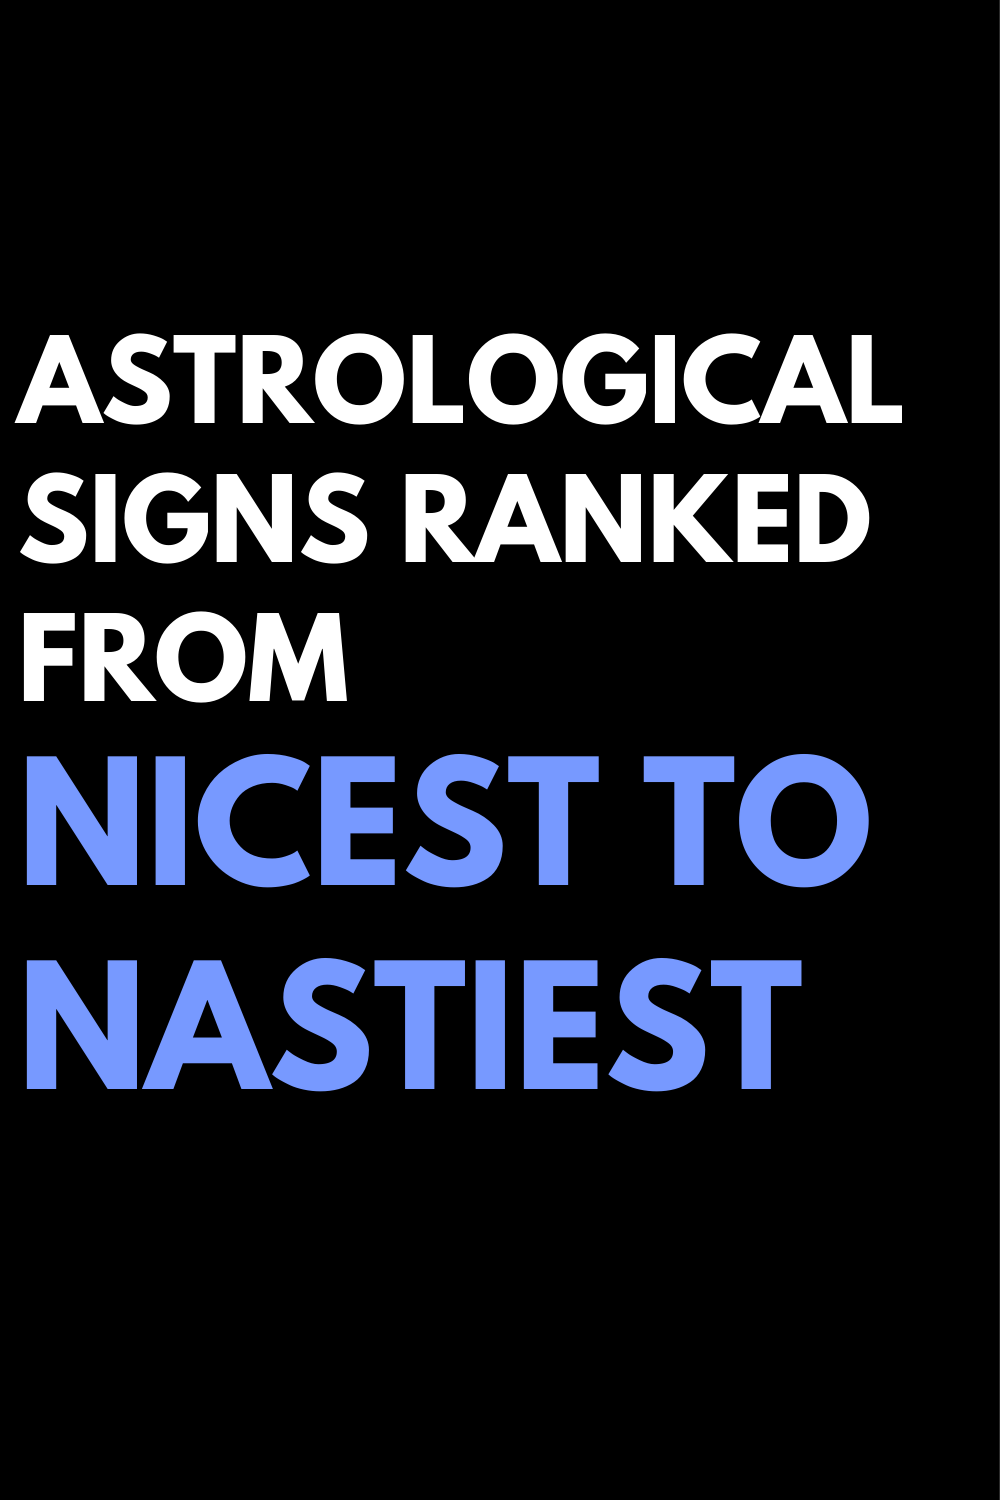 Astrological signs ranked from nicest to nastiest